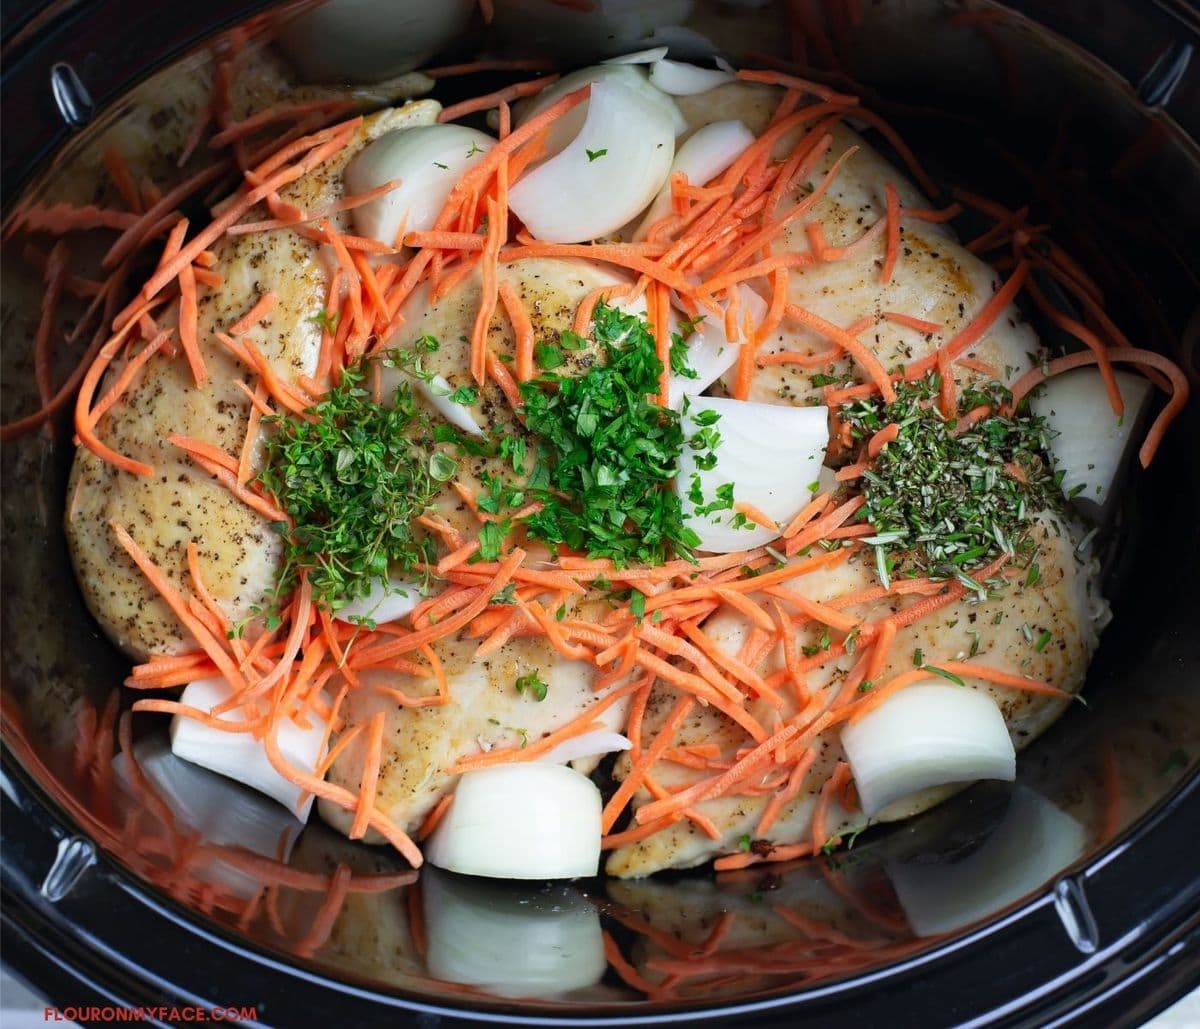 Overhead photo of the creamy chicken ingredients layered inside the crock pot.